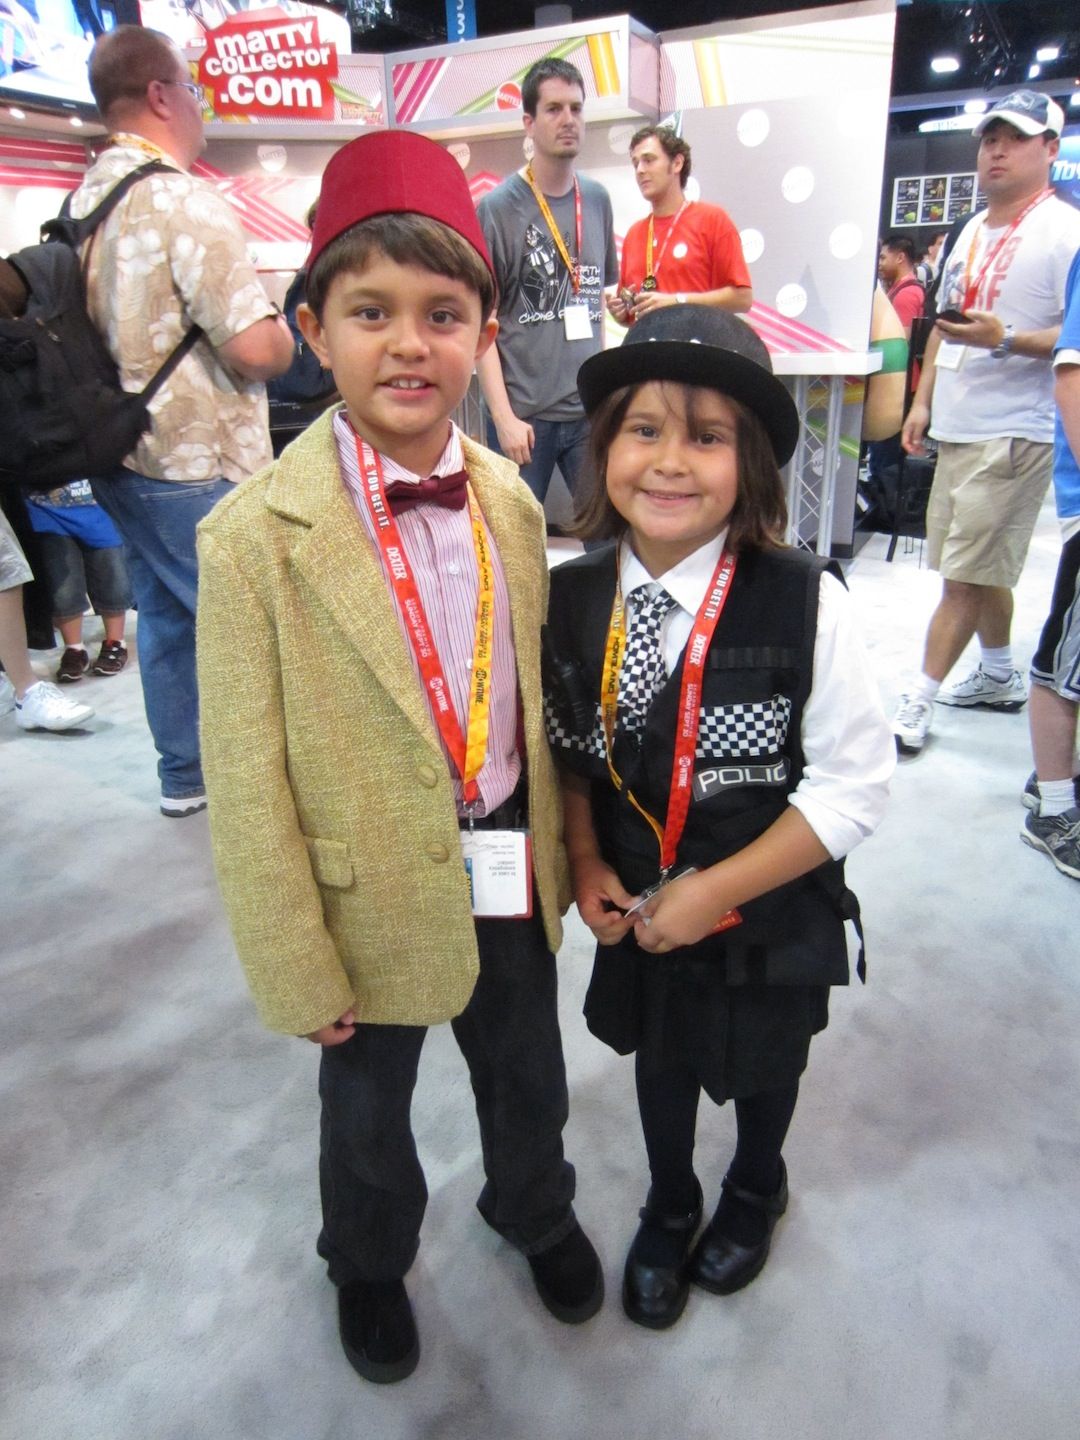 Comic Con 2012 kids cosplay Dr Who with his fez and Amy Pond Kissogram costumes